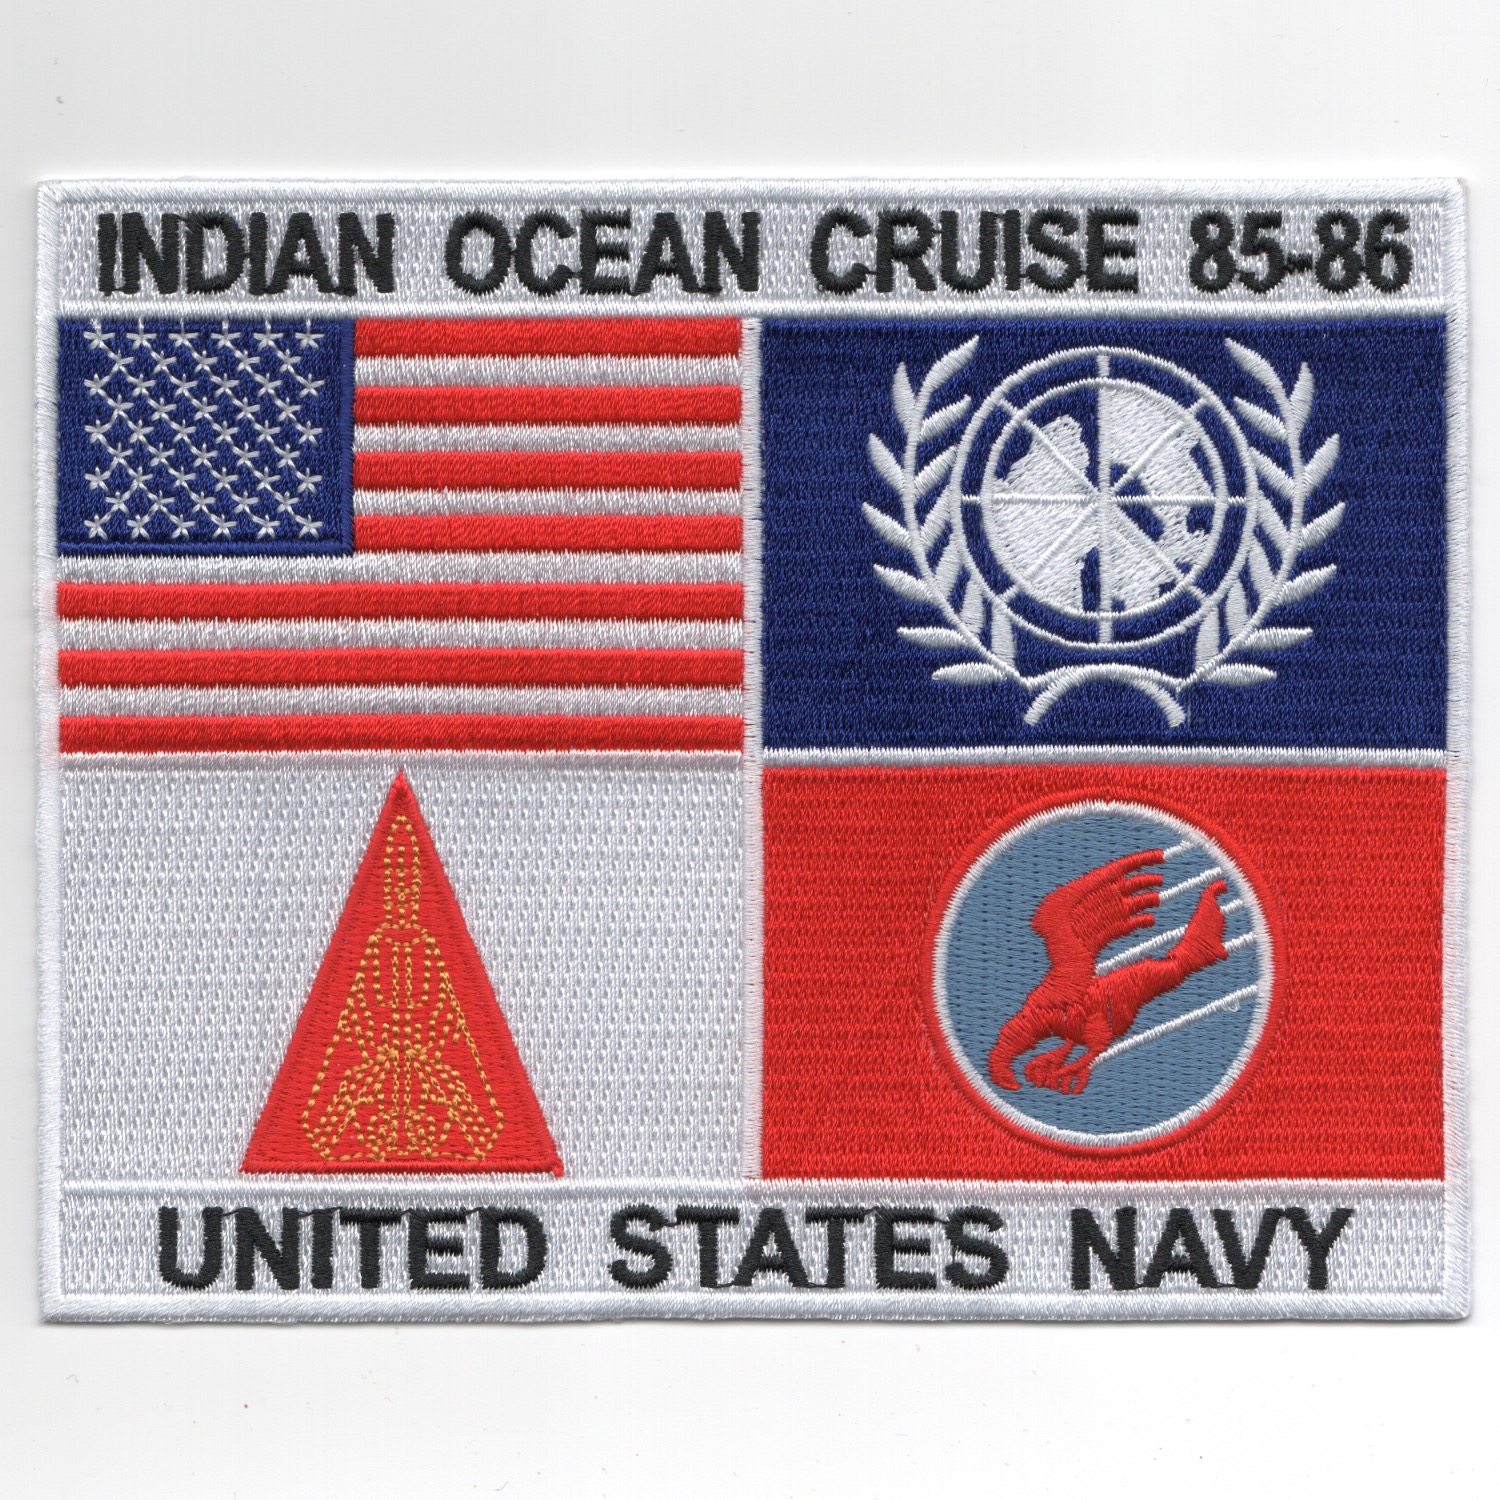 Indian Ocean 1985-86 Cruise Backpatch